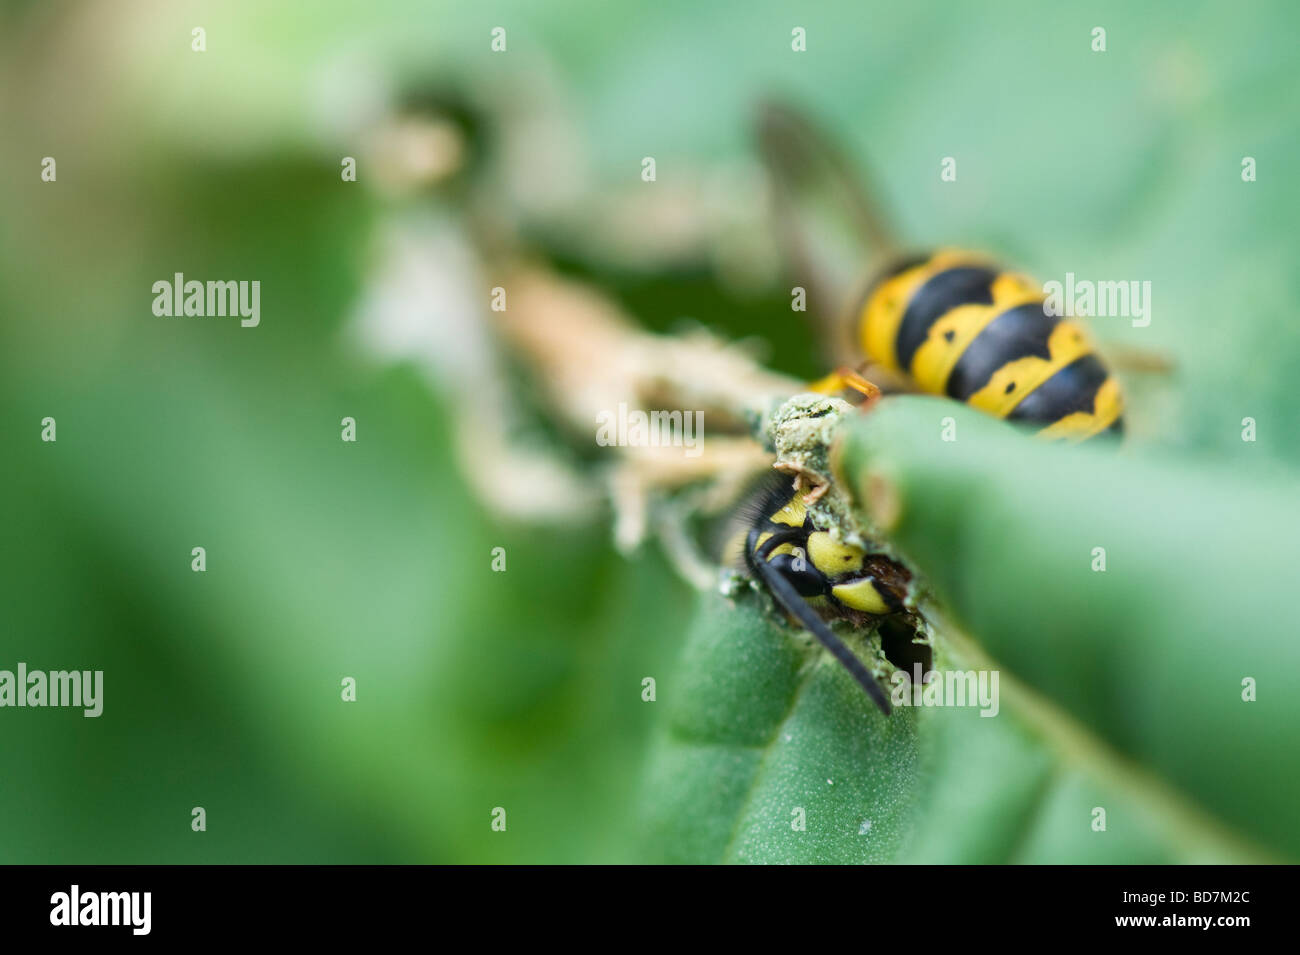 Vespula vulgaris. Wasps eating rhubarb leaves in an English garden. Gathering plant material for nest building Stock Photo